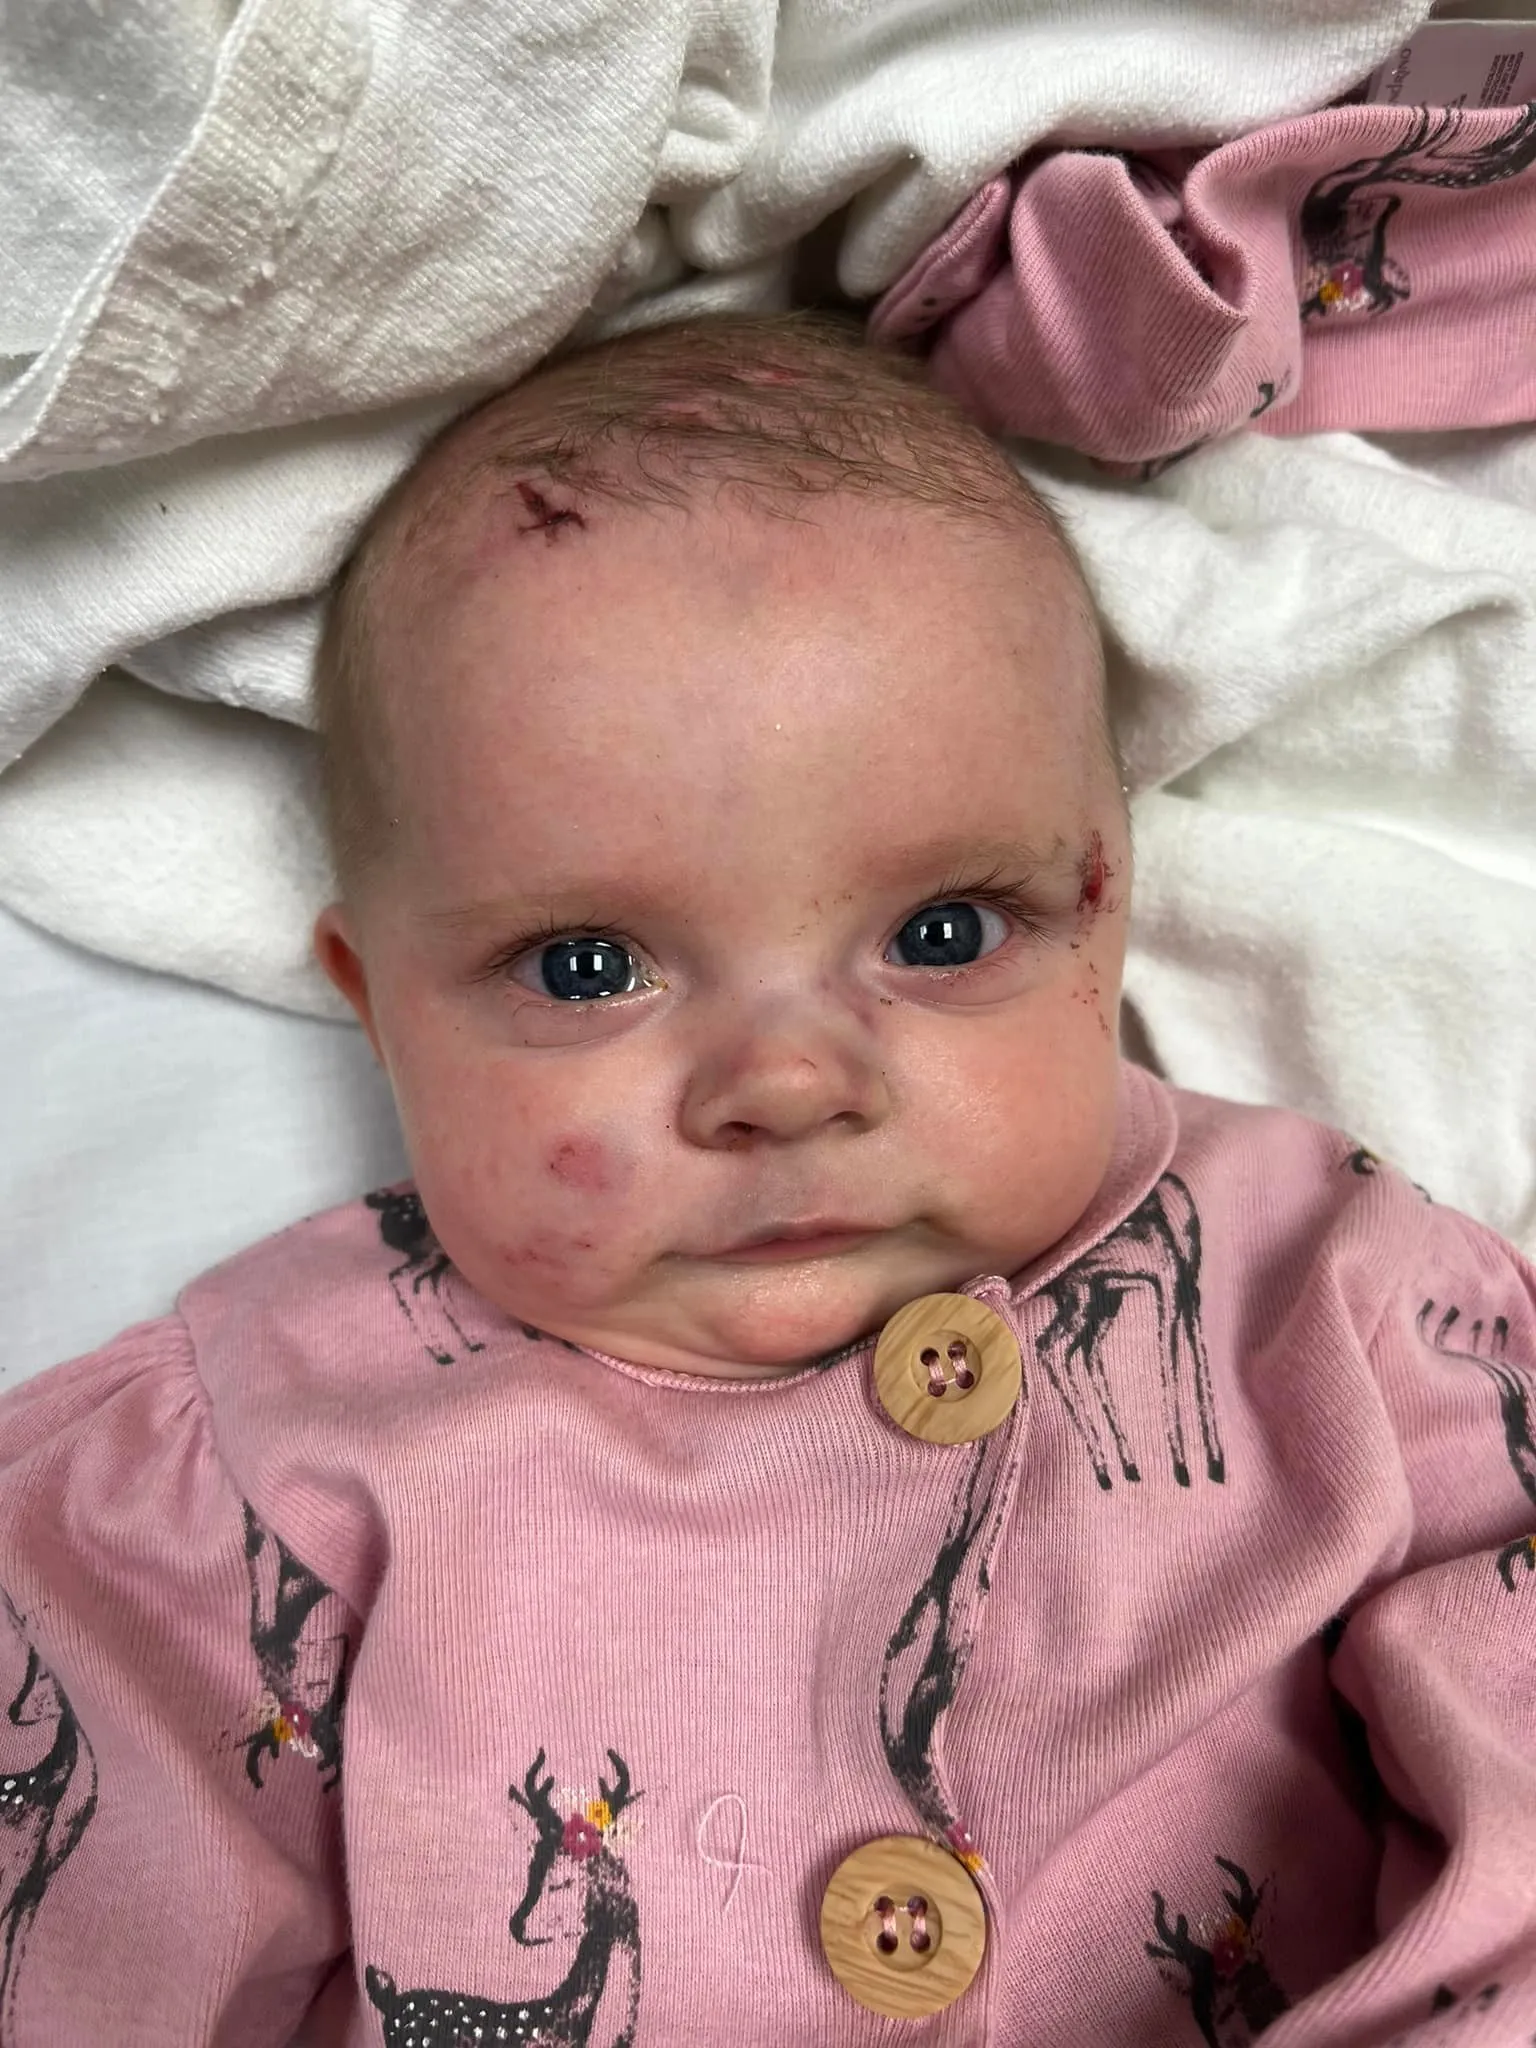 This 4-month-old was discovered alive on a fallen tree after being carried away by a deadly tornado